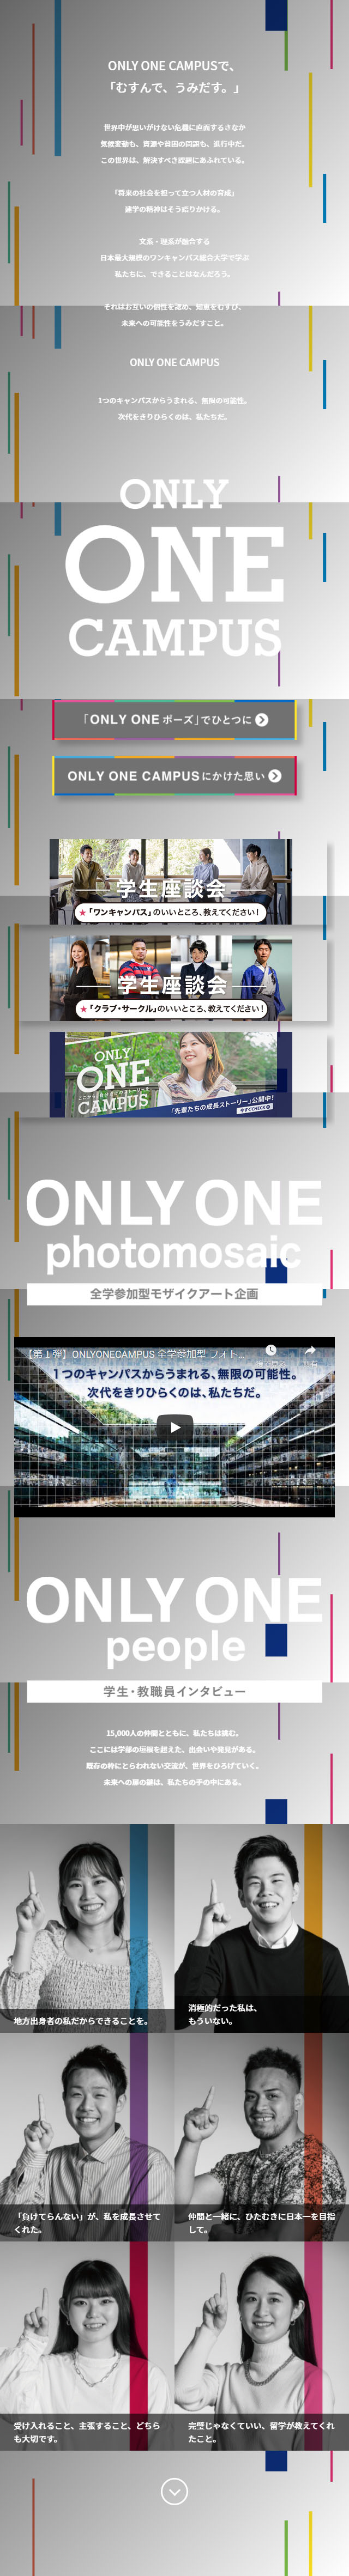 ONLY ONE CAMPUS_sp_1